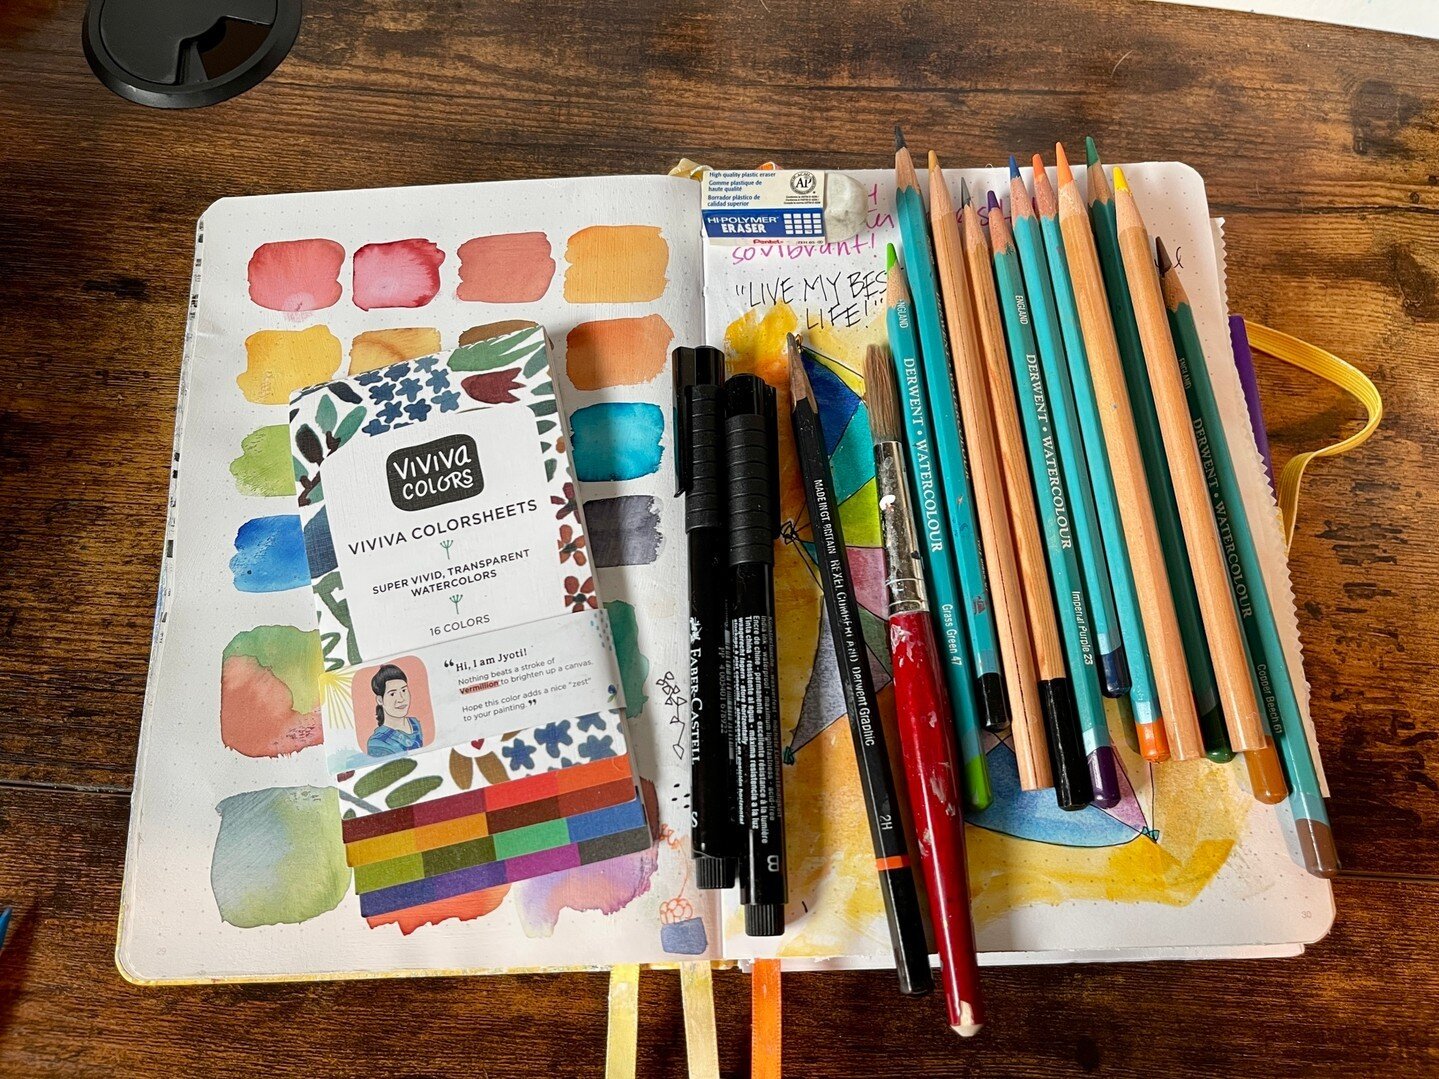 I'm so pumped for my trip to Australia! I can't wait to capture all the amazing sights in my journal with my PITT pens, Viviana color sheets, Derwent watercolor pencils, and water brushes. Let the creativity flow! What are your favorite travel art su